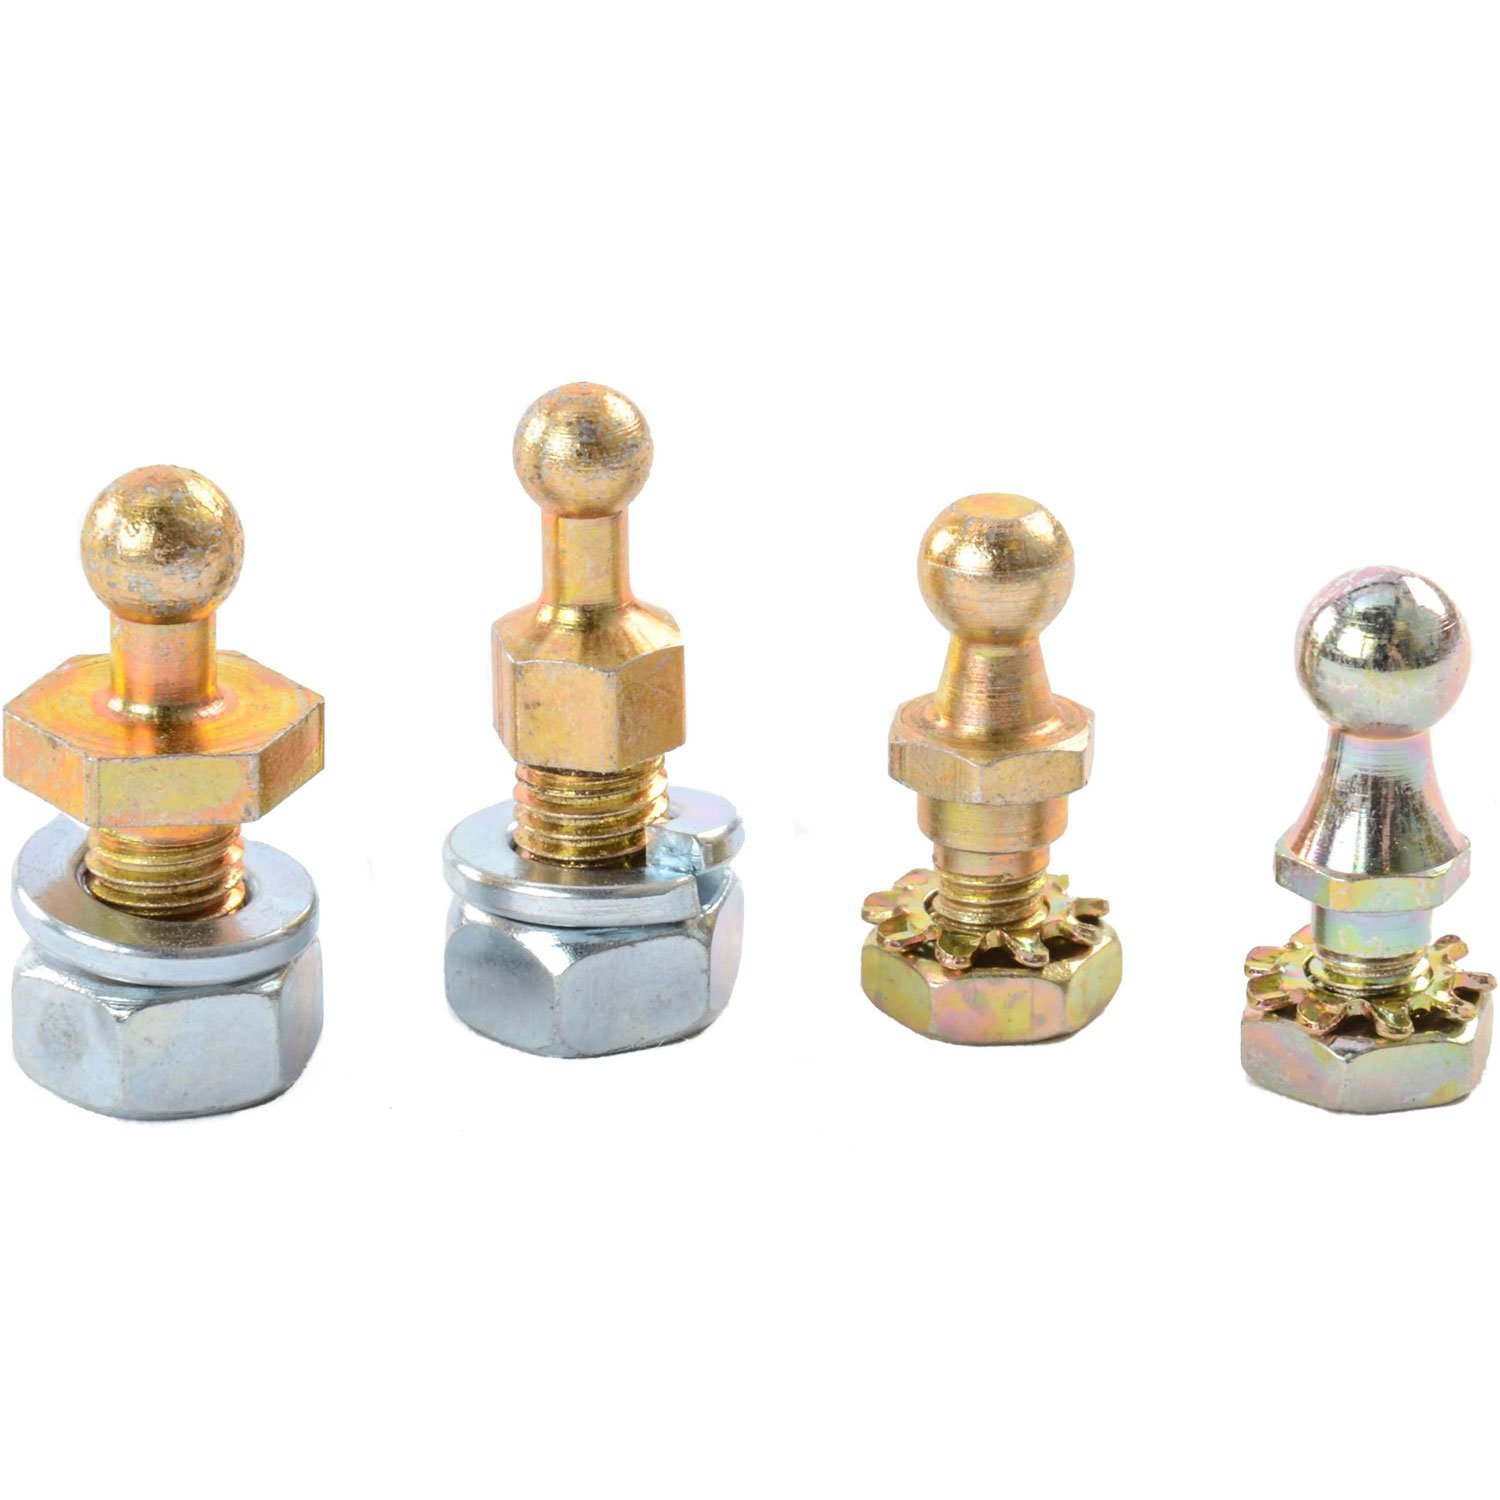 Throttle Linkage Ball Studs Kit Contains The Following: 1/4", 5/16", 7/32" & 3/8" Studs